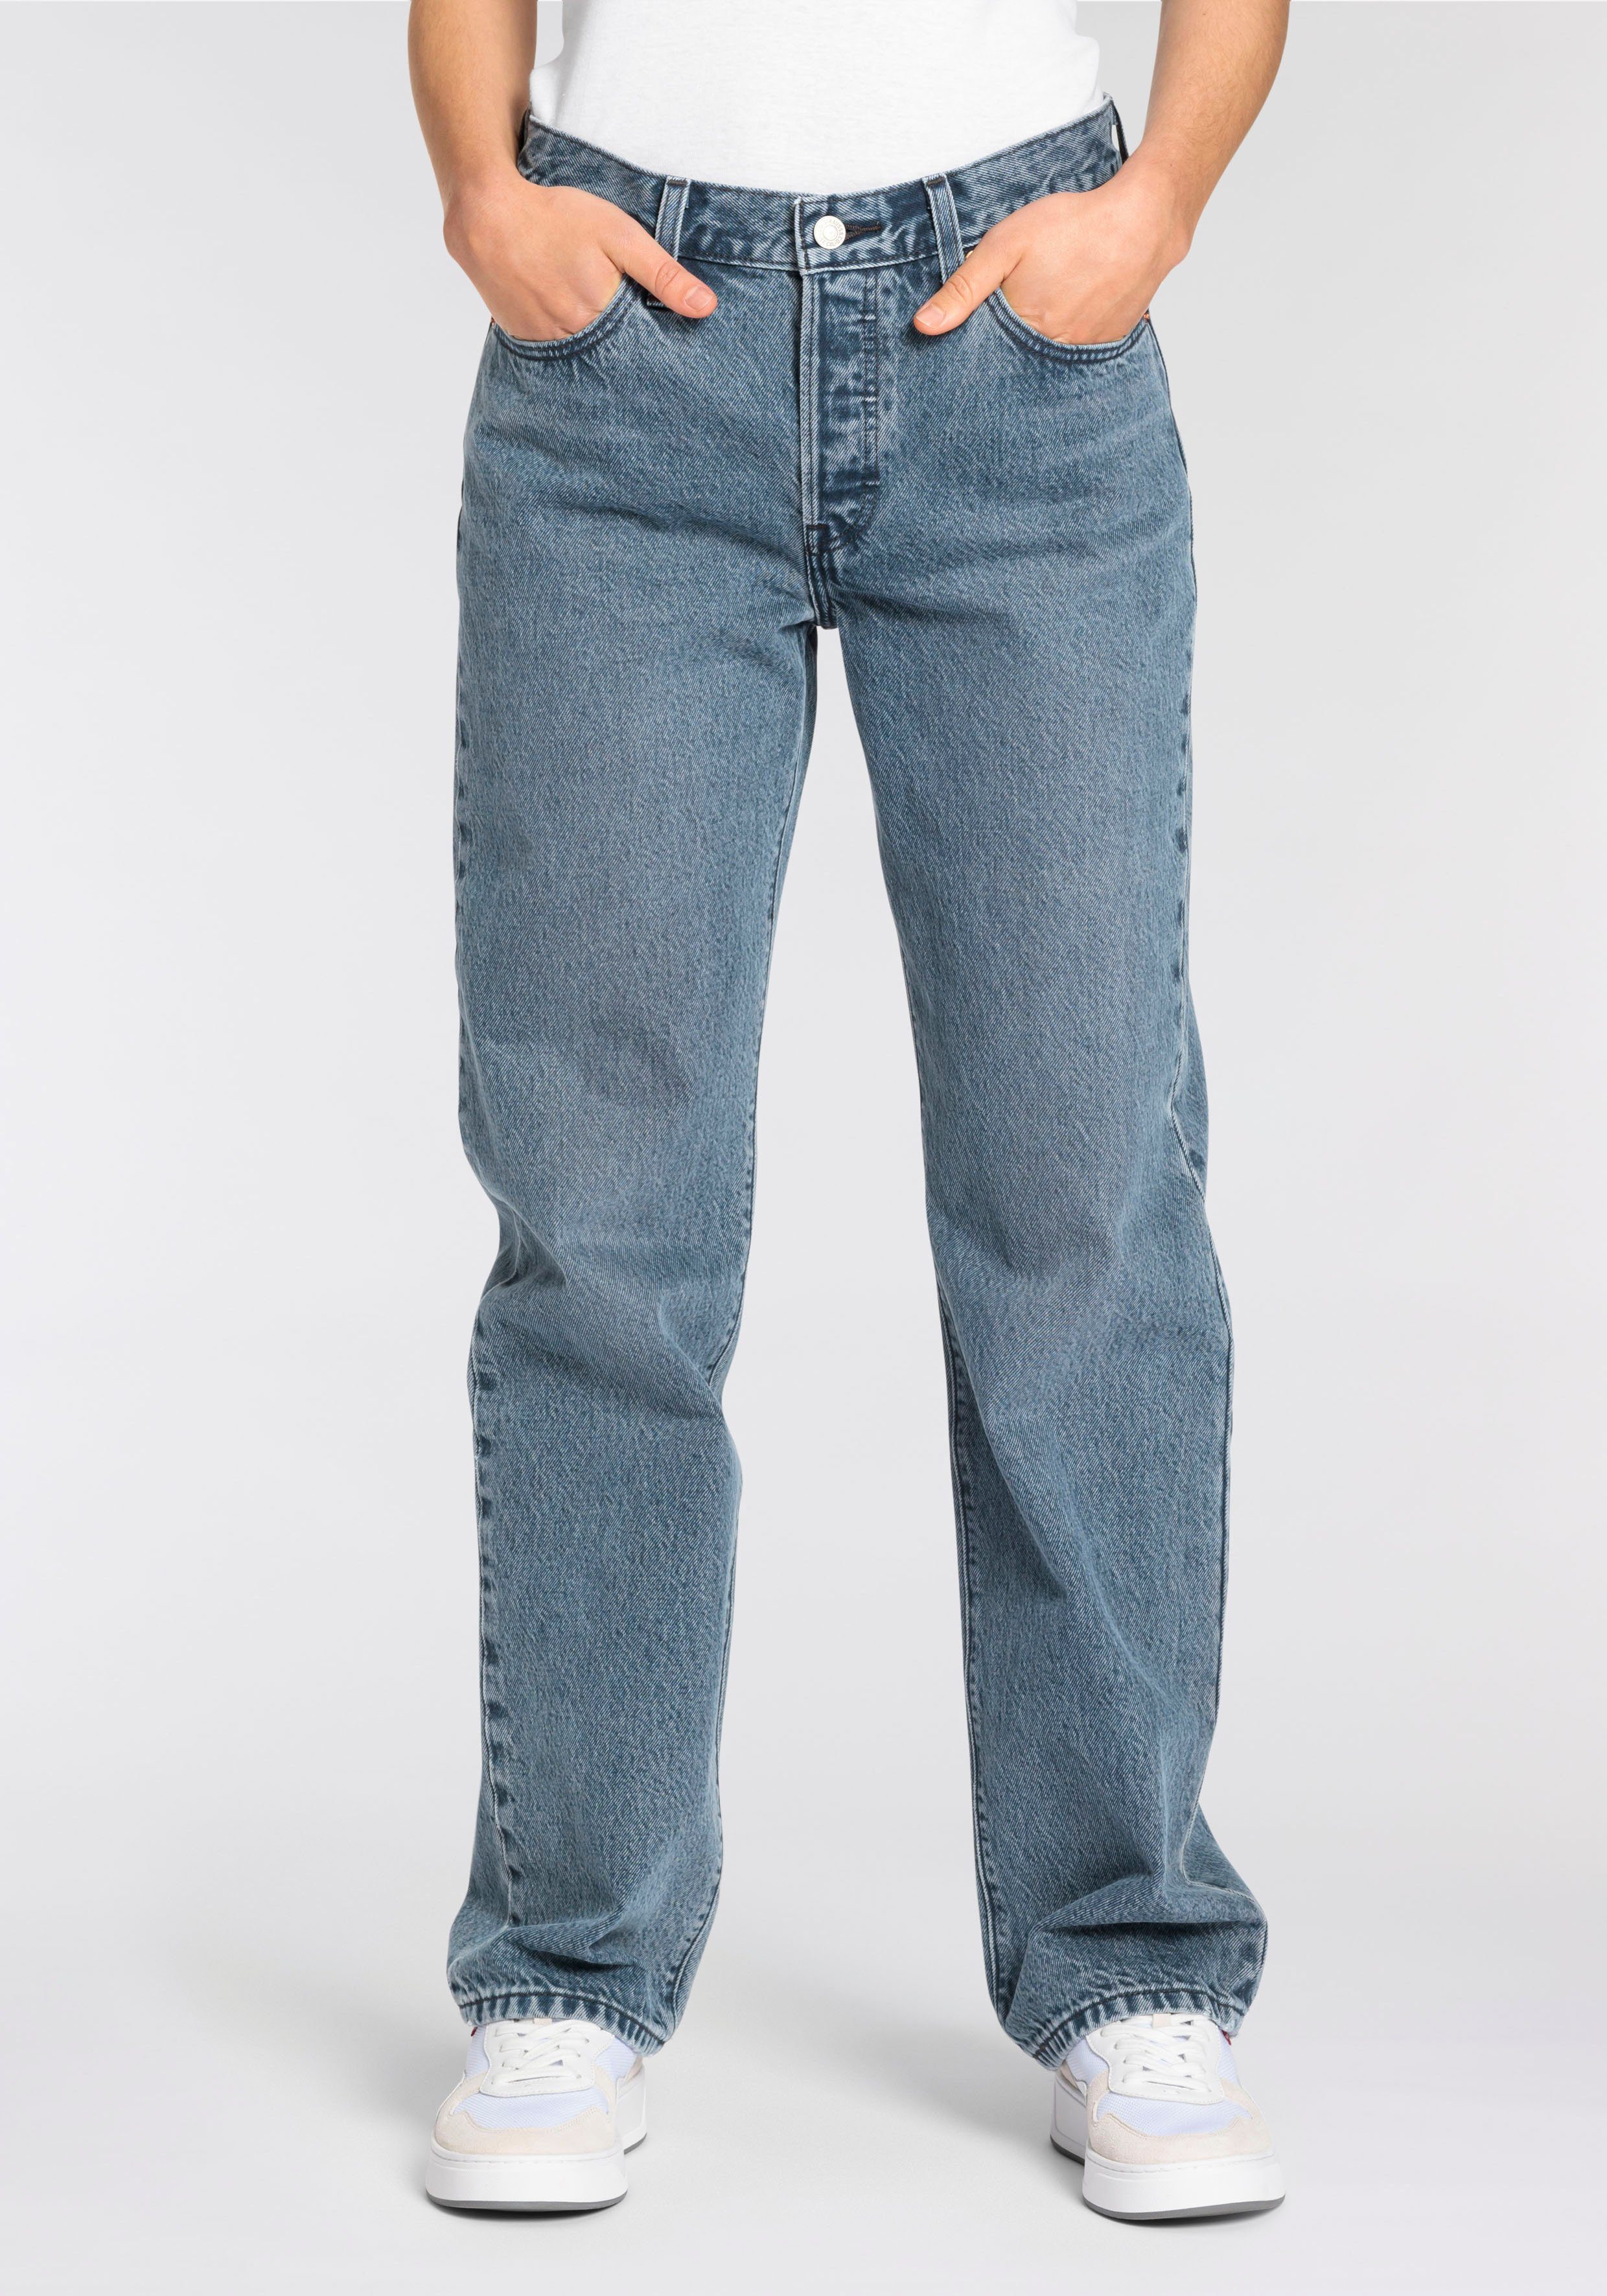 Levi's® Weite Jeans 90'S 501 501 Collection multi denim